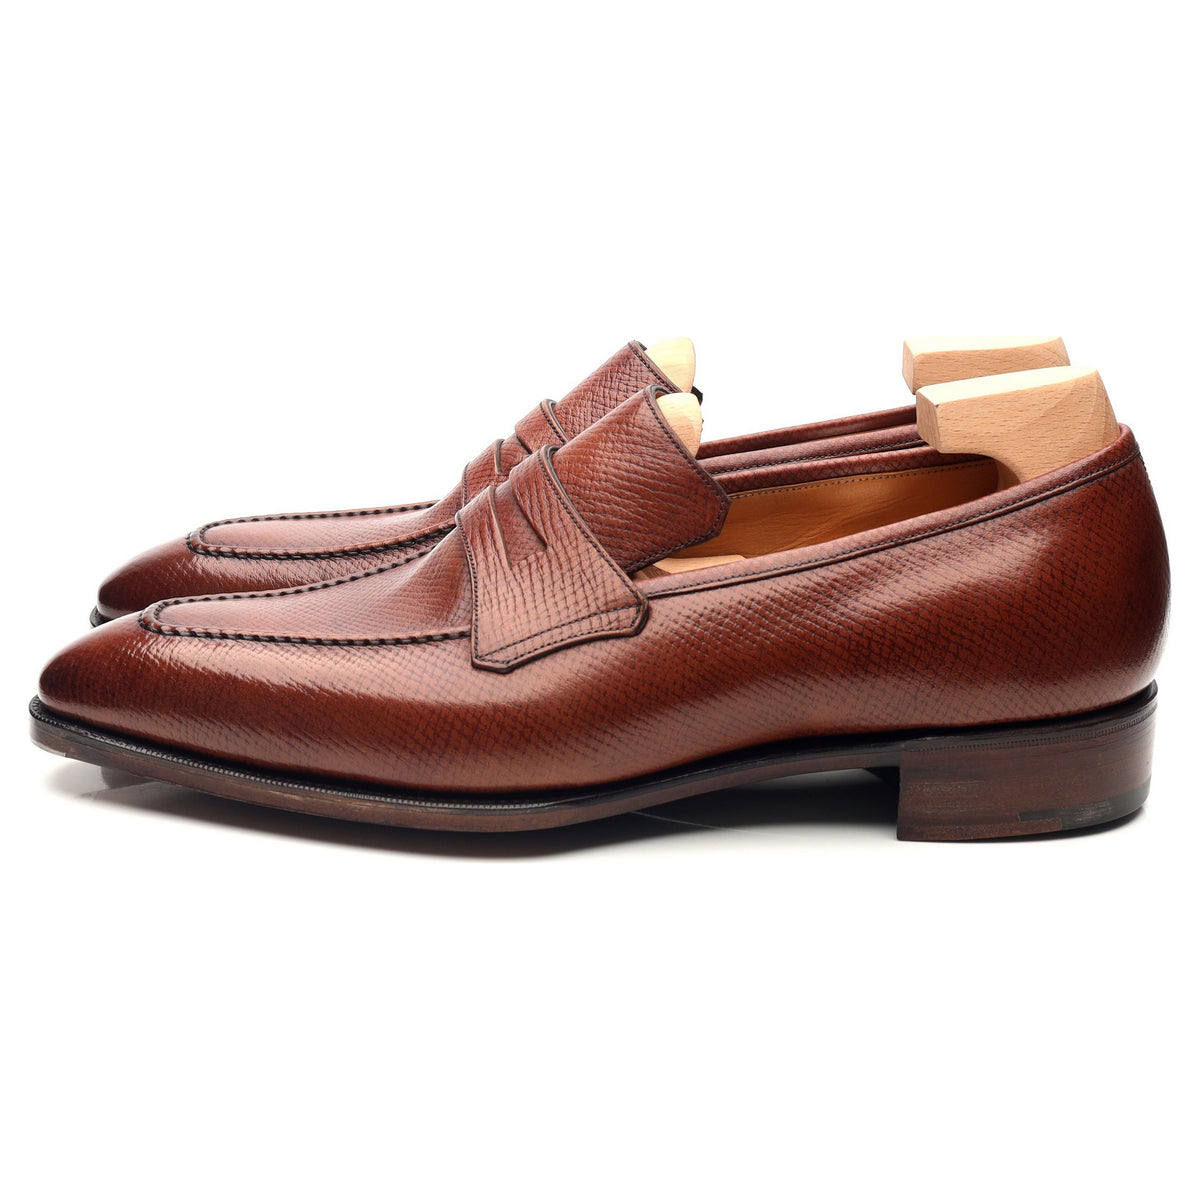 officiel Bugt picnic Como' Tan Brown Leather Loafers UK 7.5 F - Abbot's Shoes